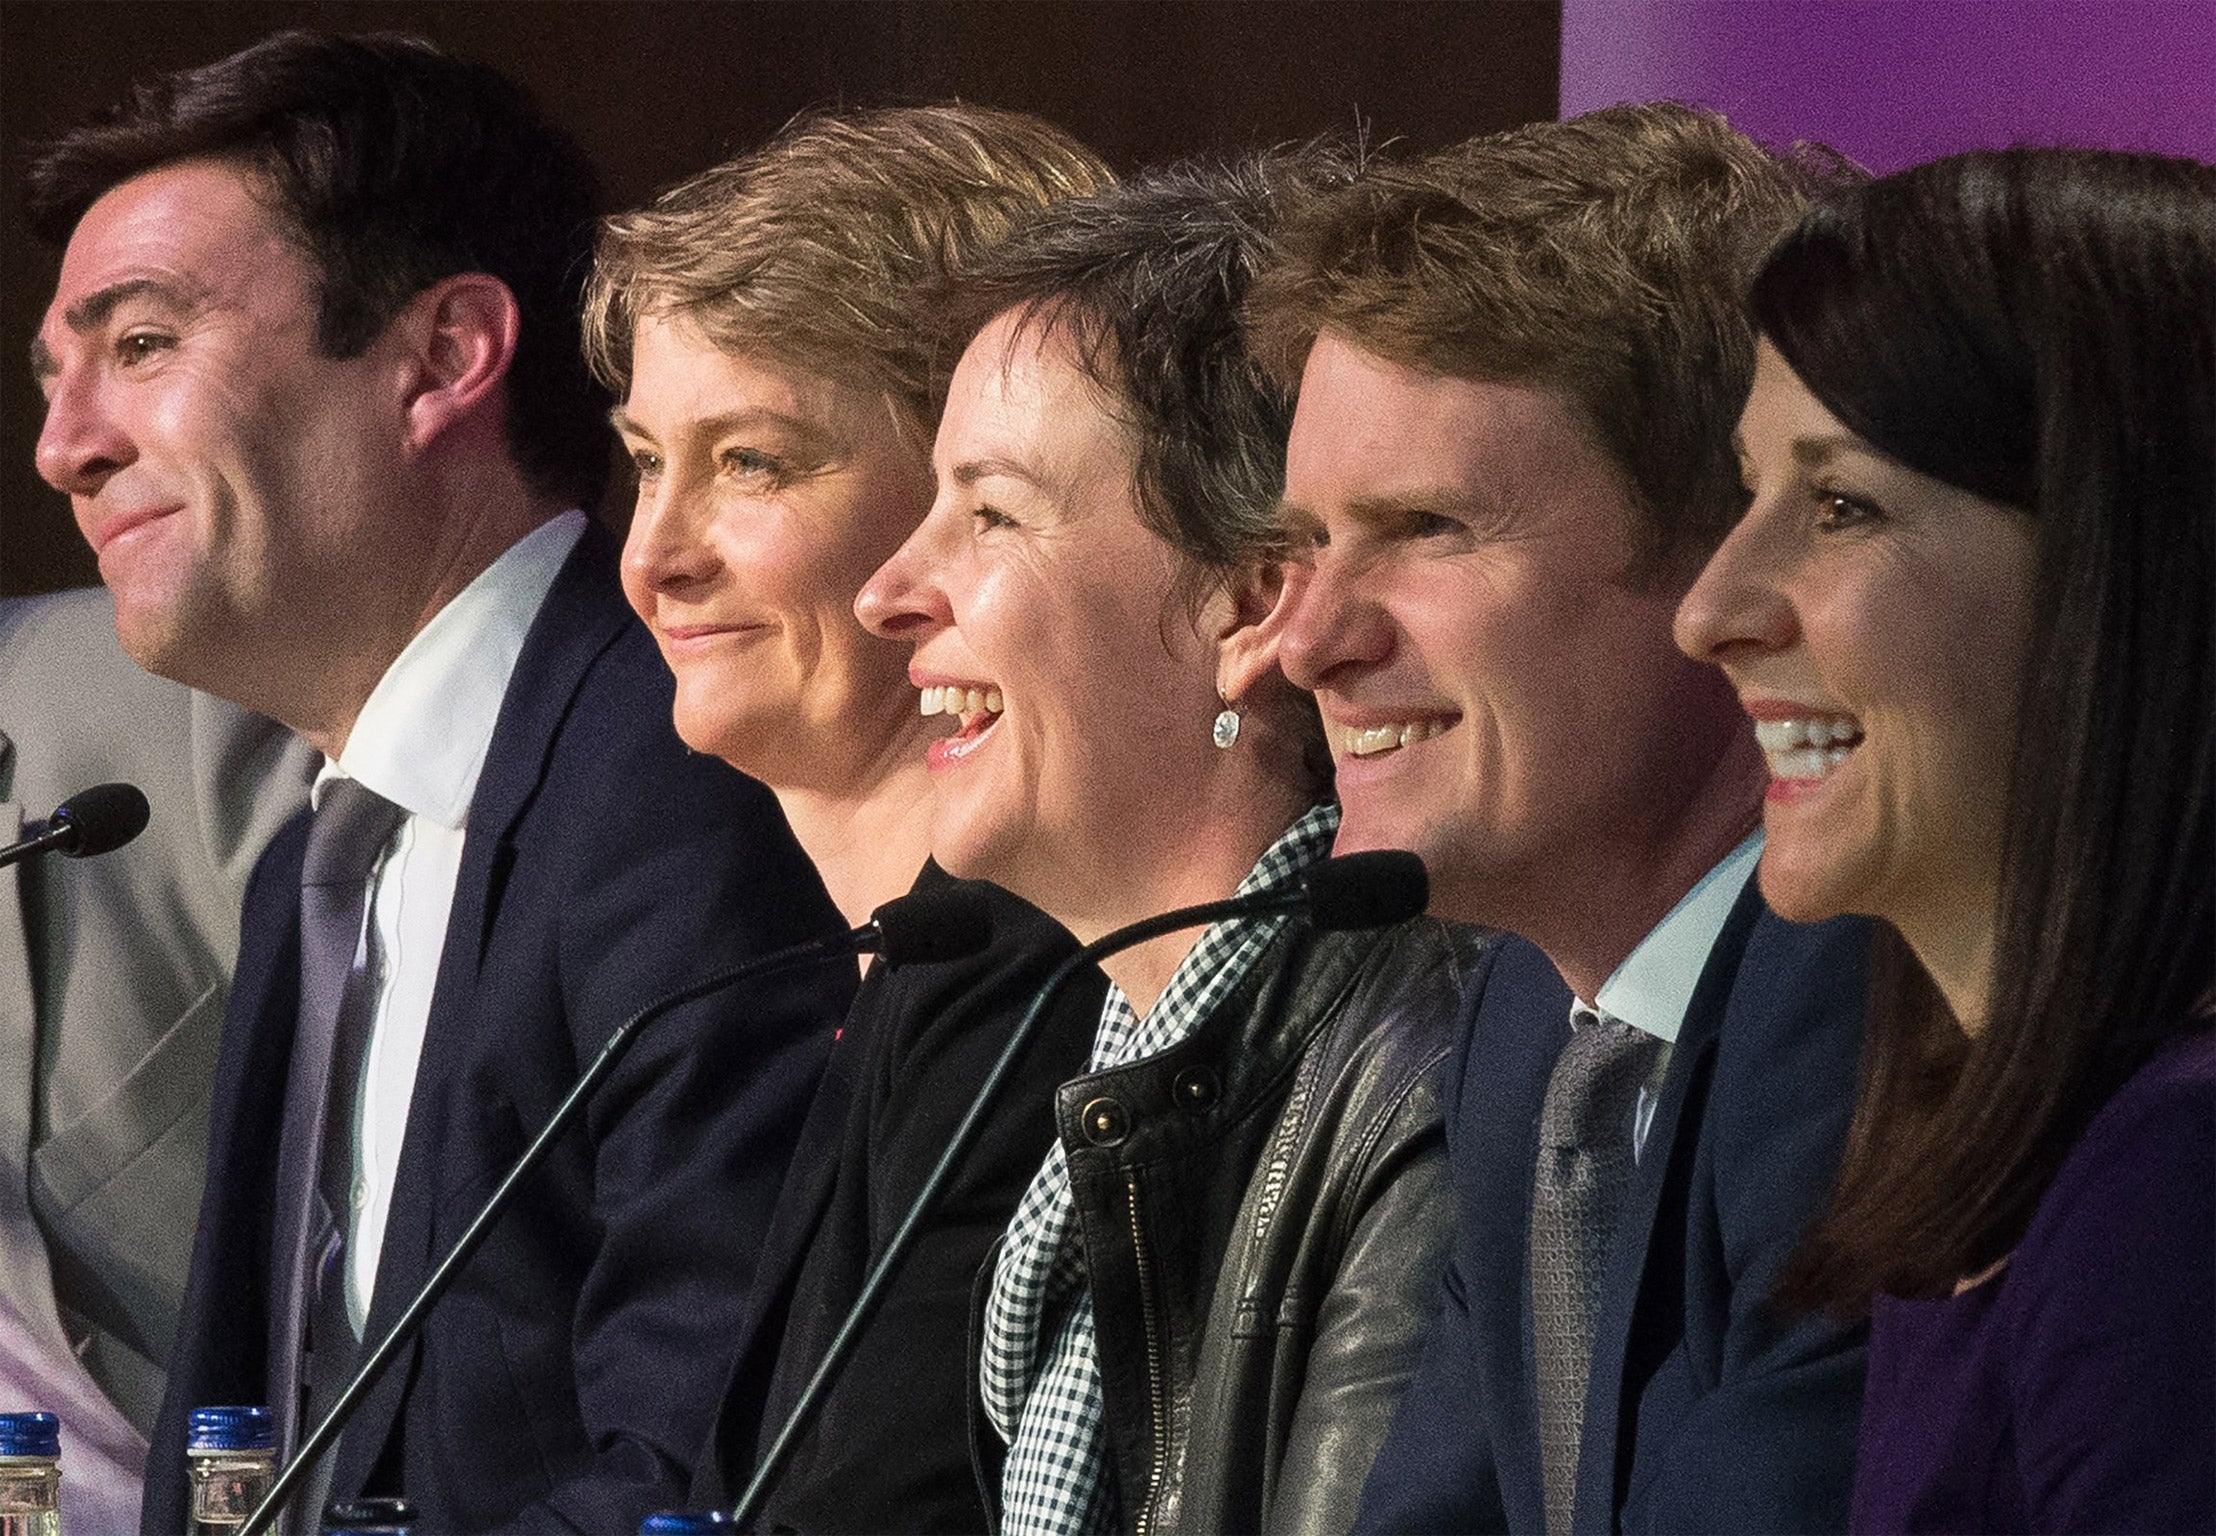 Andy Burnham, Yvette Cooper, Mary Creagh, Tristram Hunt and Liz Kendall address delegates at the Progress annual conference in central London, last weekend